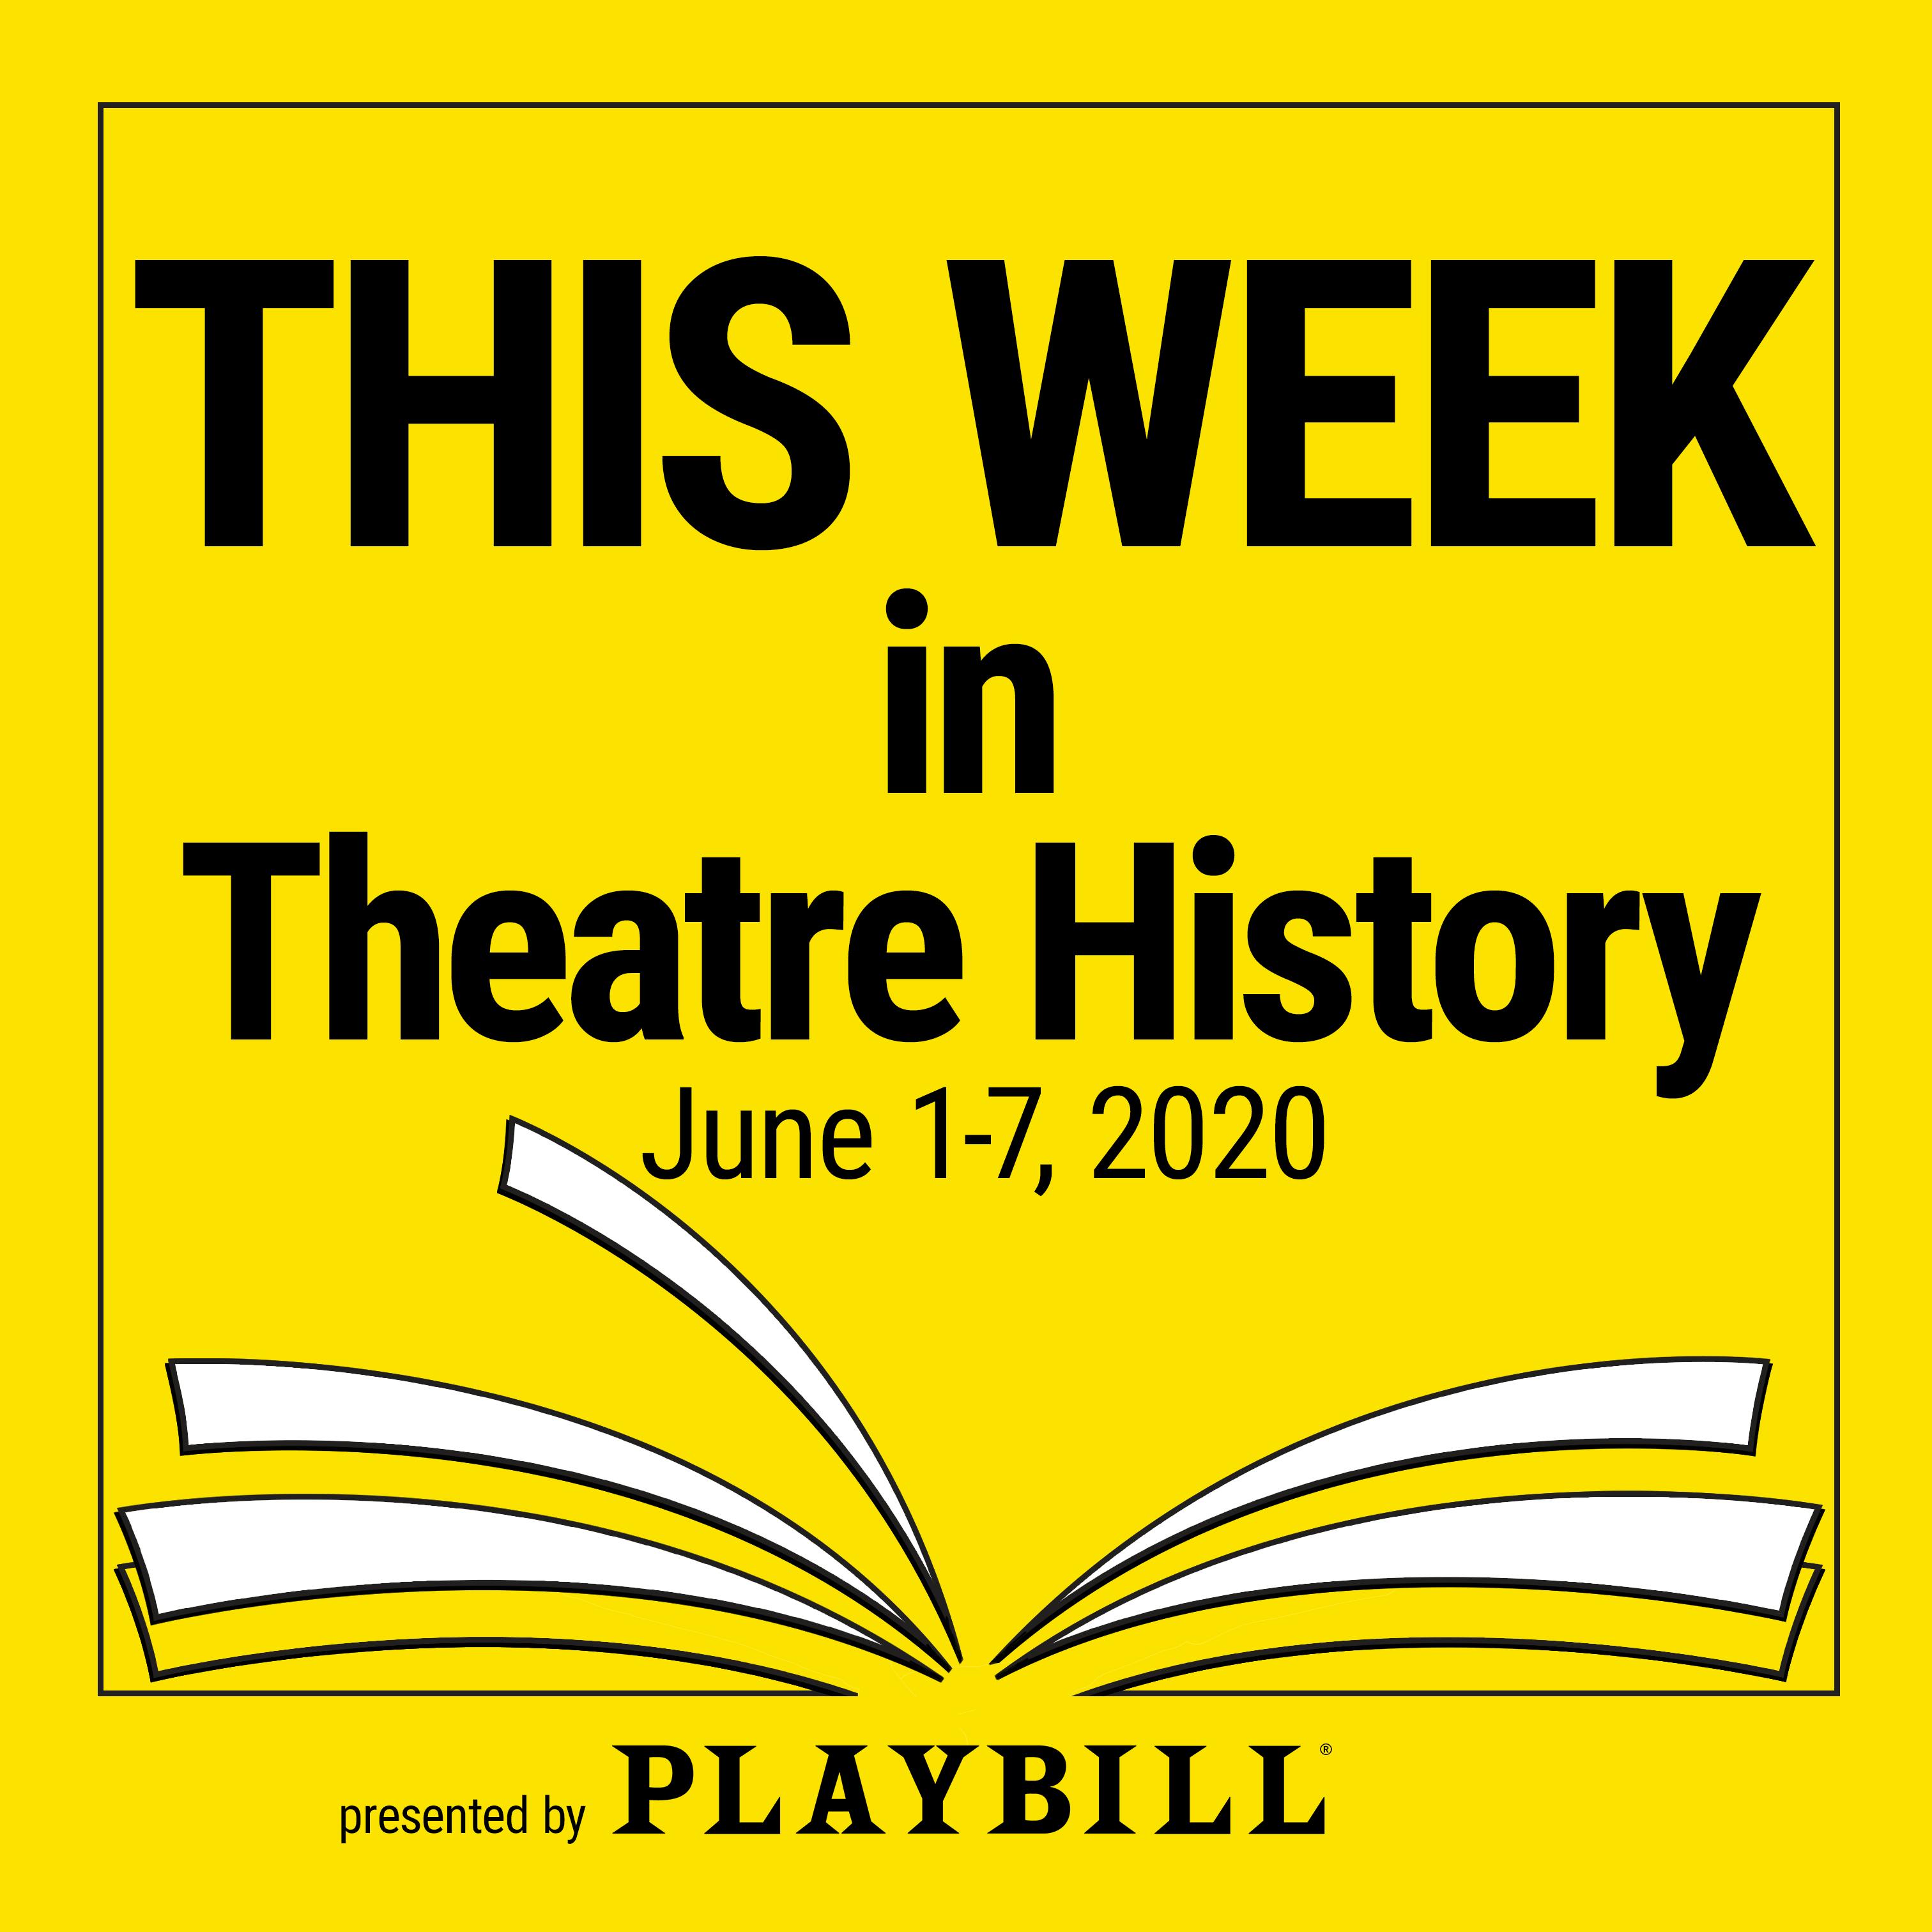 June 1–7, 2020: Bob Fosse, Gwen Verdon, and Chita Rivera gave ‘em the old razzle dazzle when Chicago debuted on Broadway in 1975.